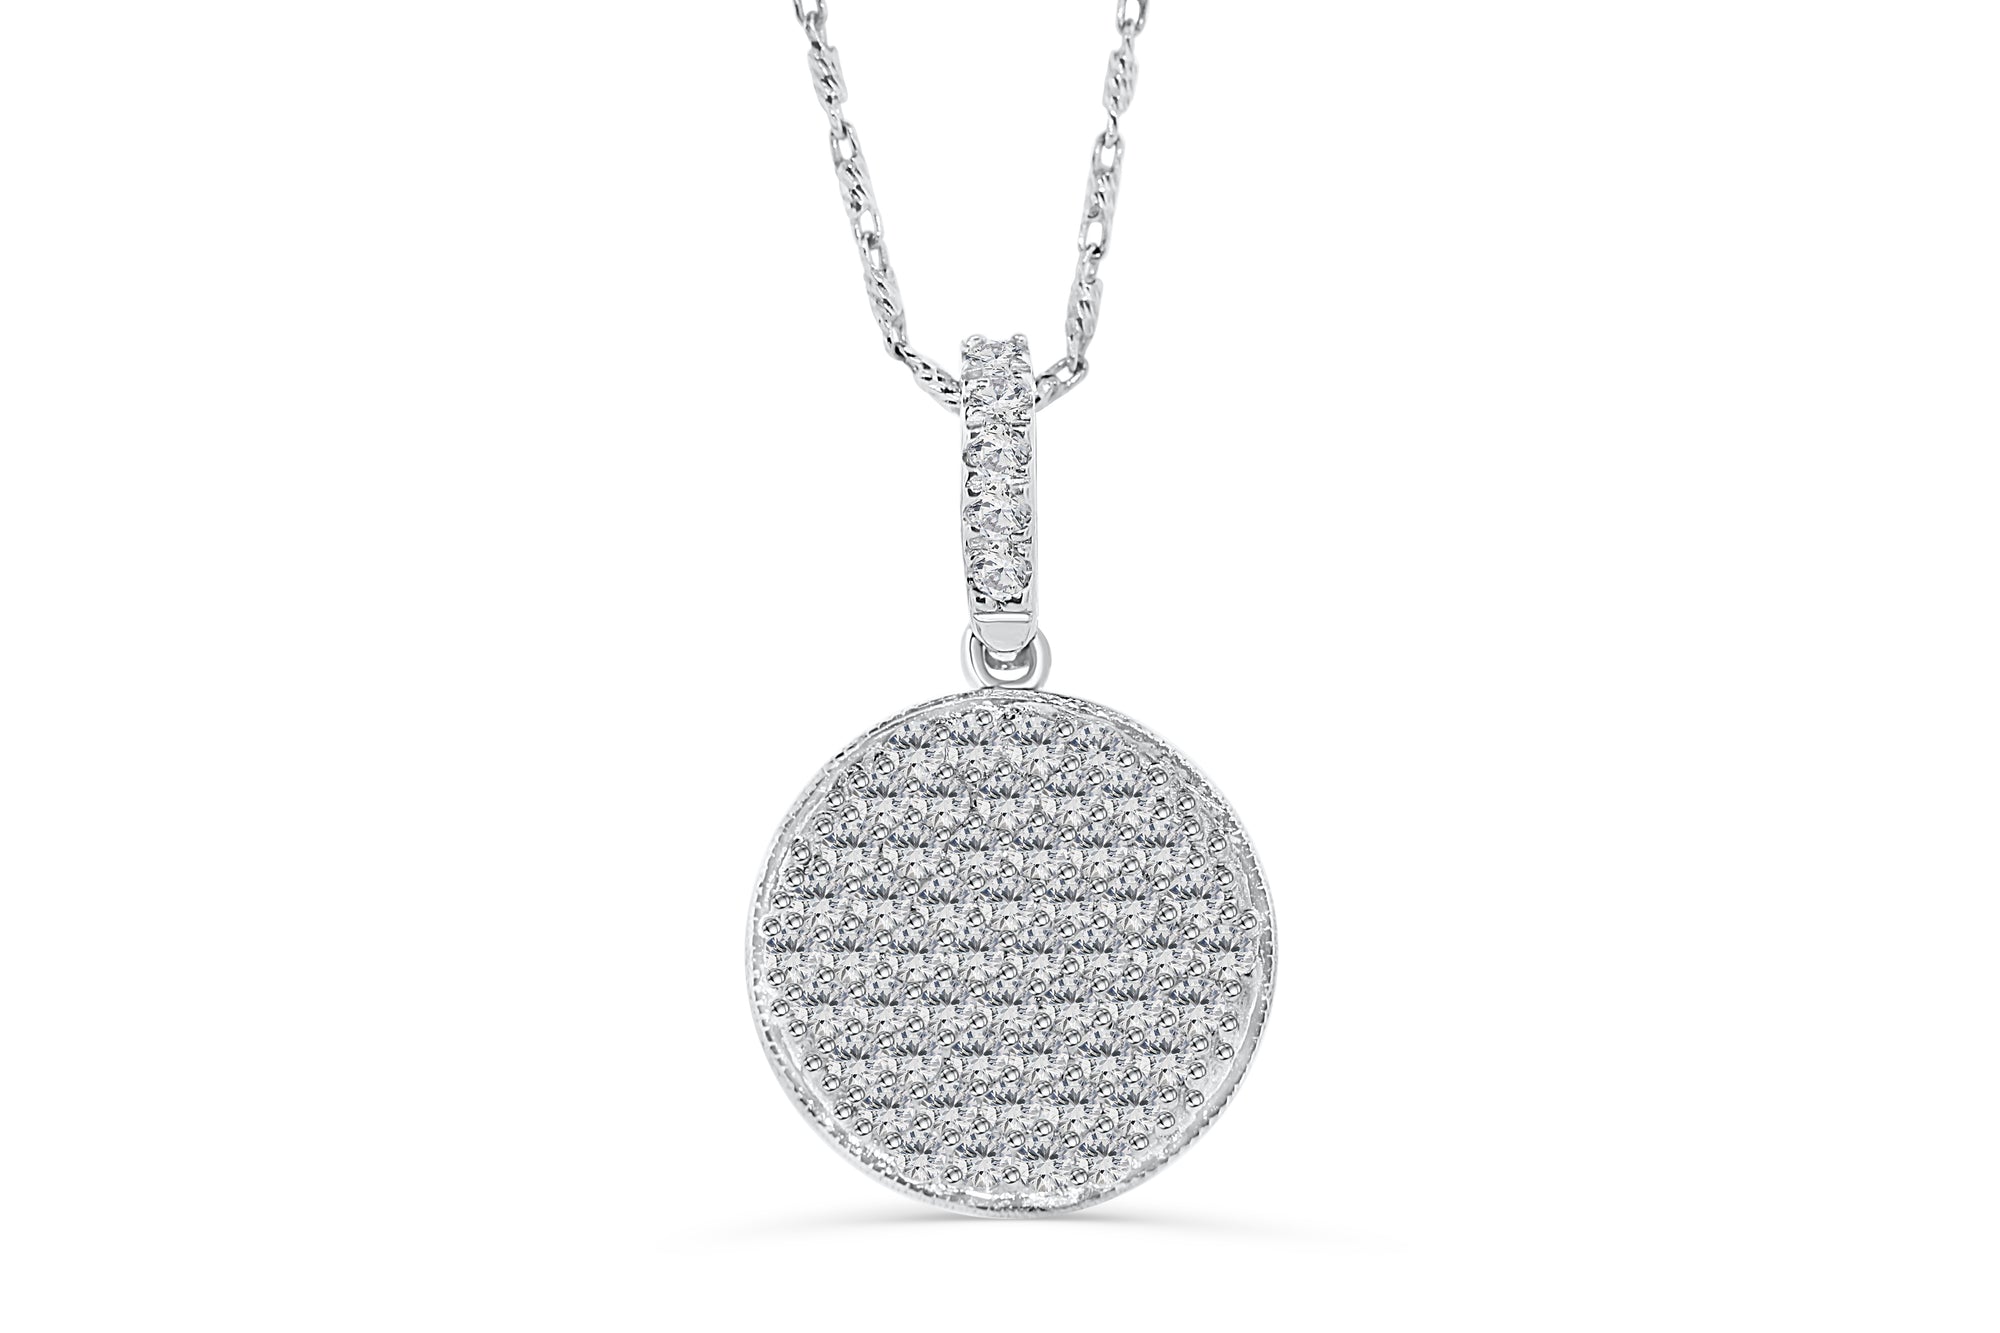 Pave Diamond Pendant 0.85 CT TW 14K White Gold DPEN001 - NorthandSouthJewelry